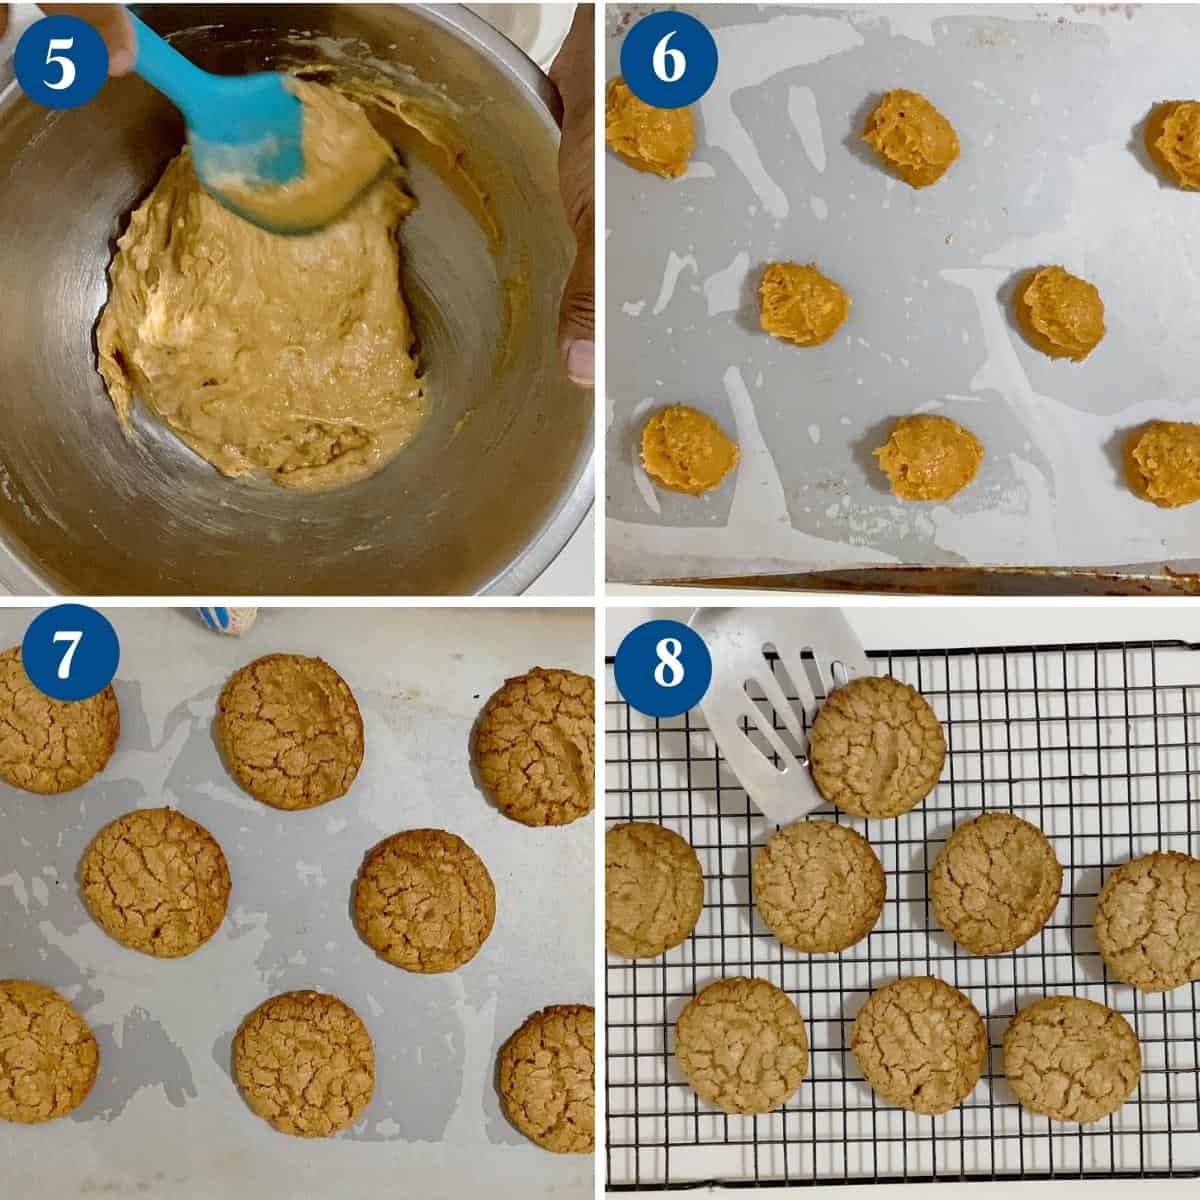 Progress pictures baking the peanut butter cookies.